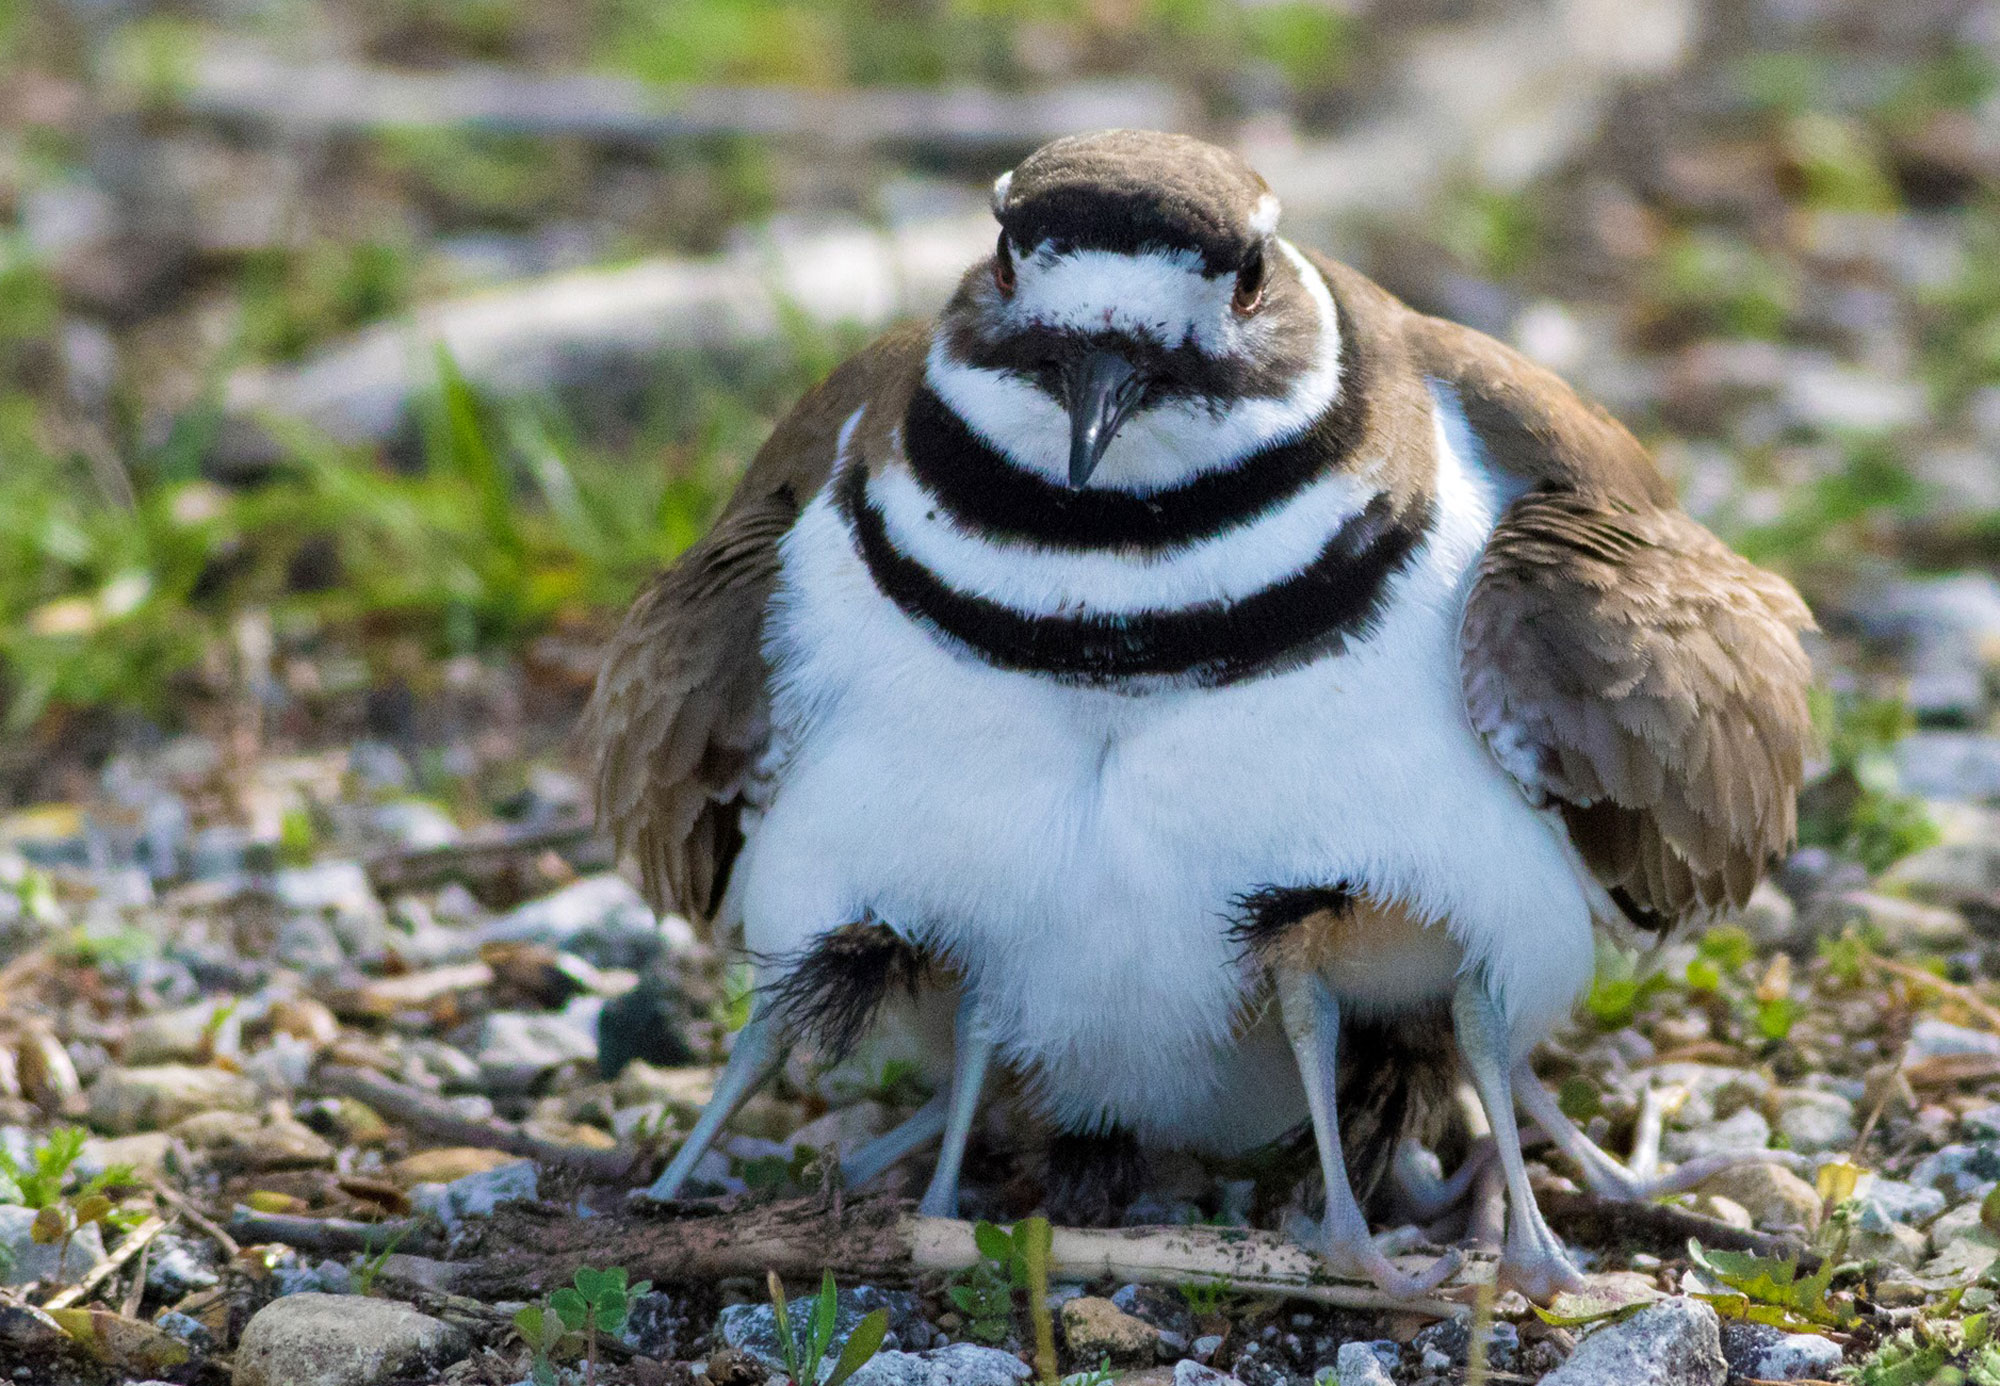 Killdeer with two babies underneath her.